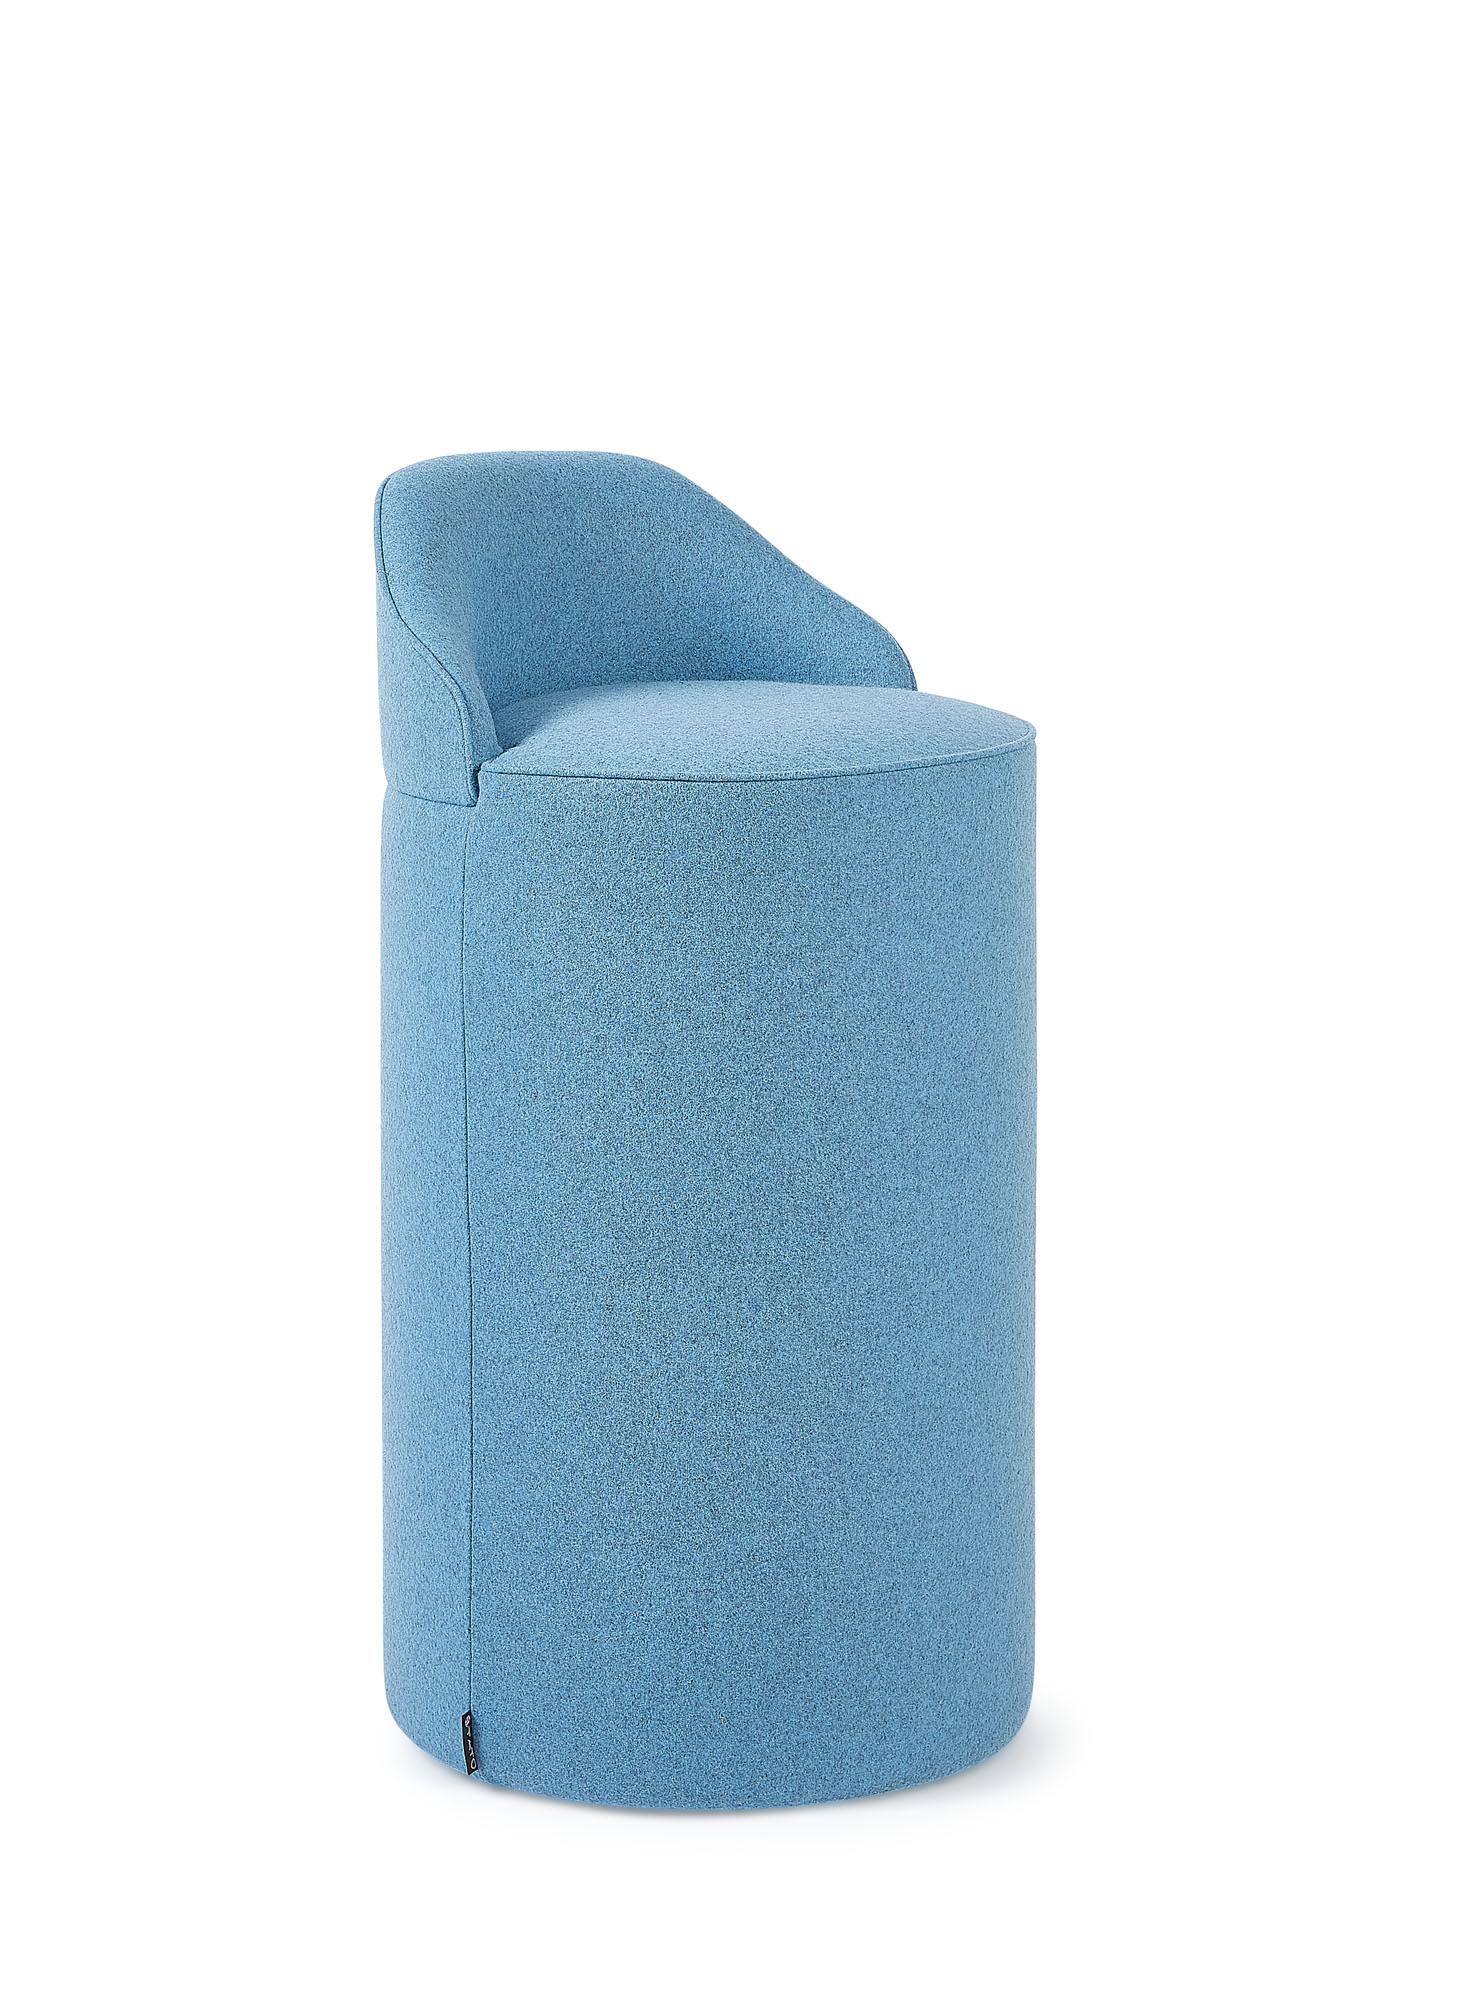 Cylindrical pouf with 68cm/27